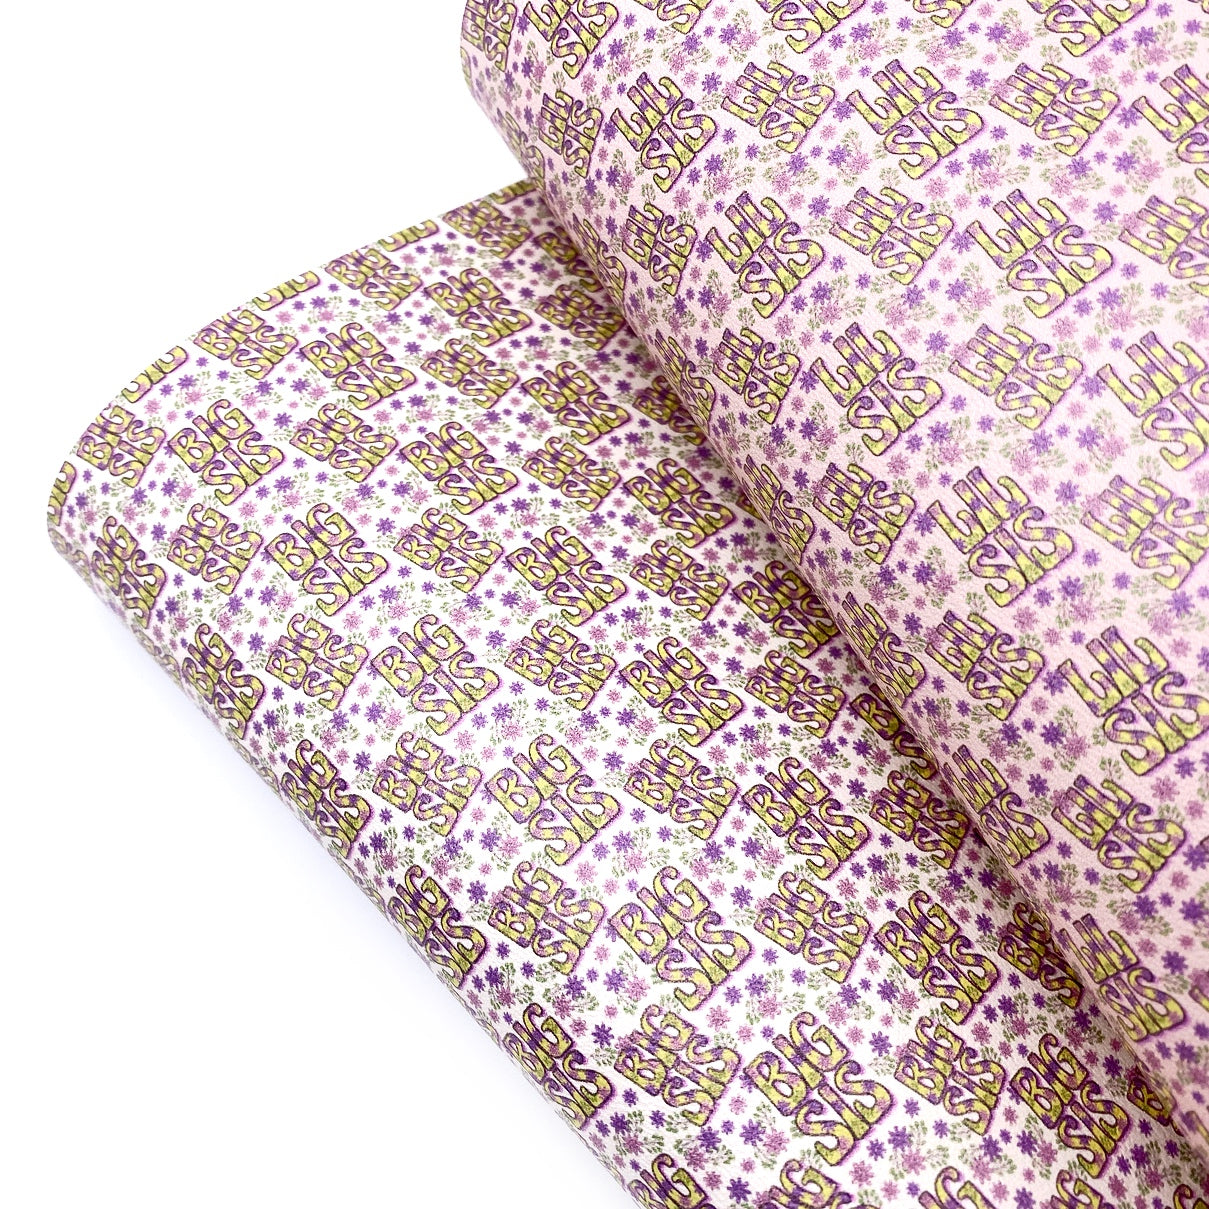 Pink Flowery Big Sis, Lil Sis Premium Faux Leather Fabric Sheets